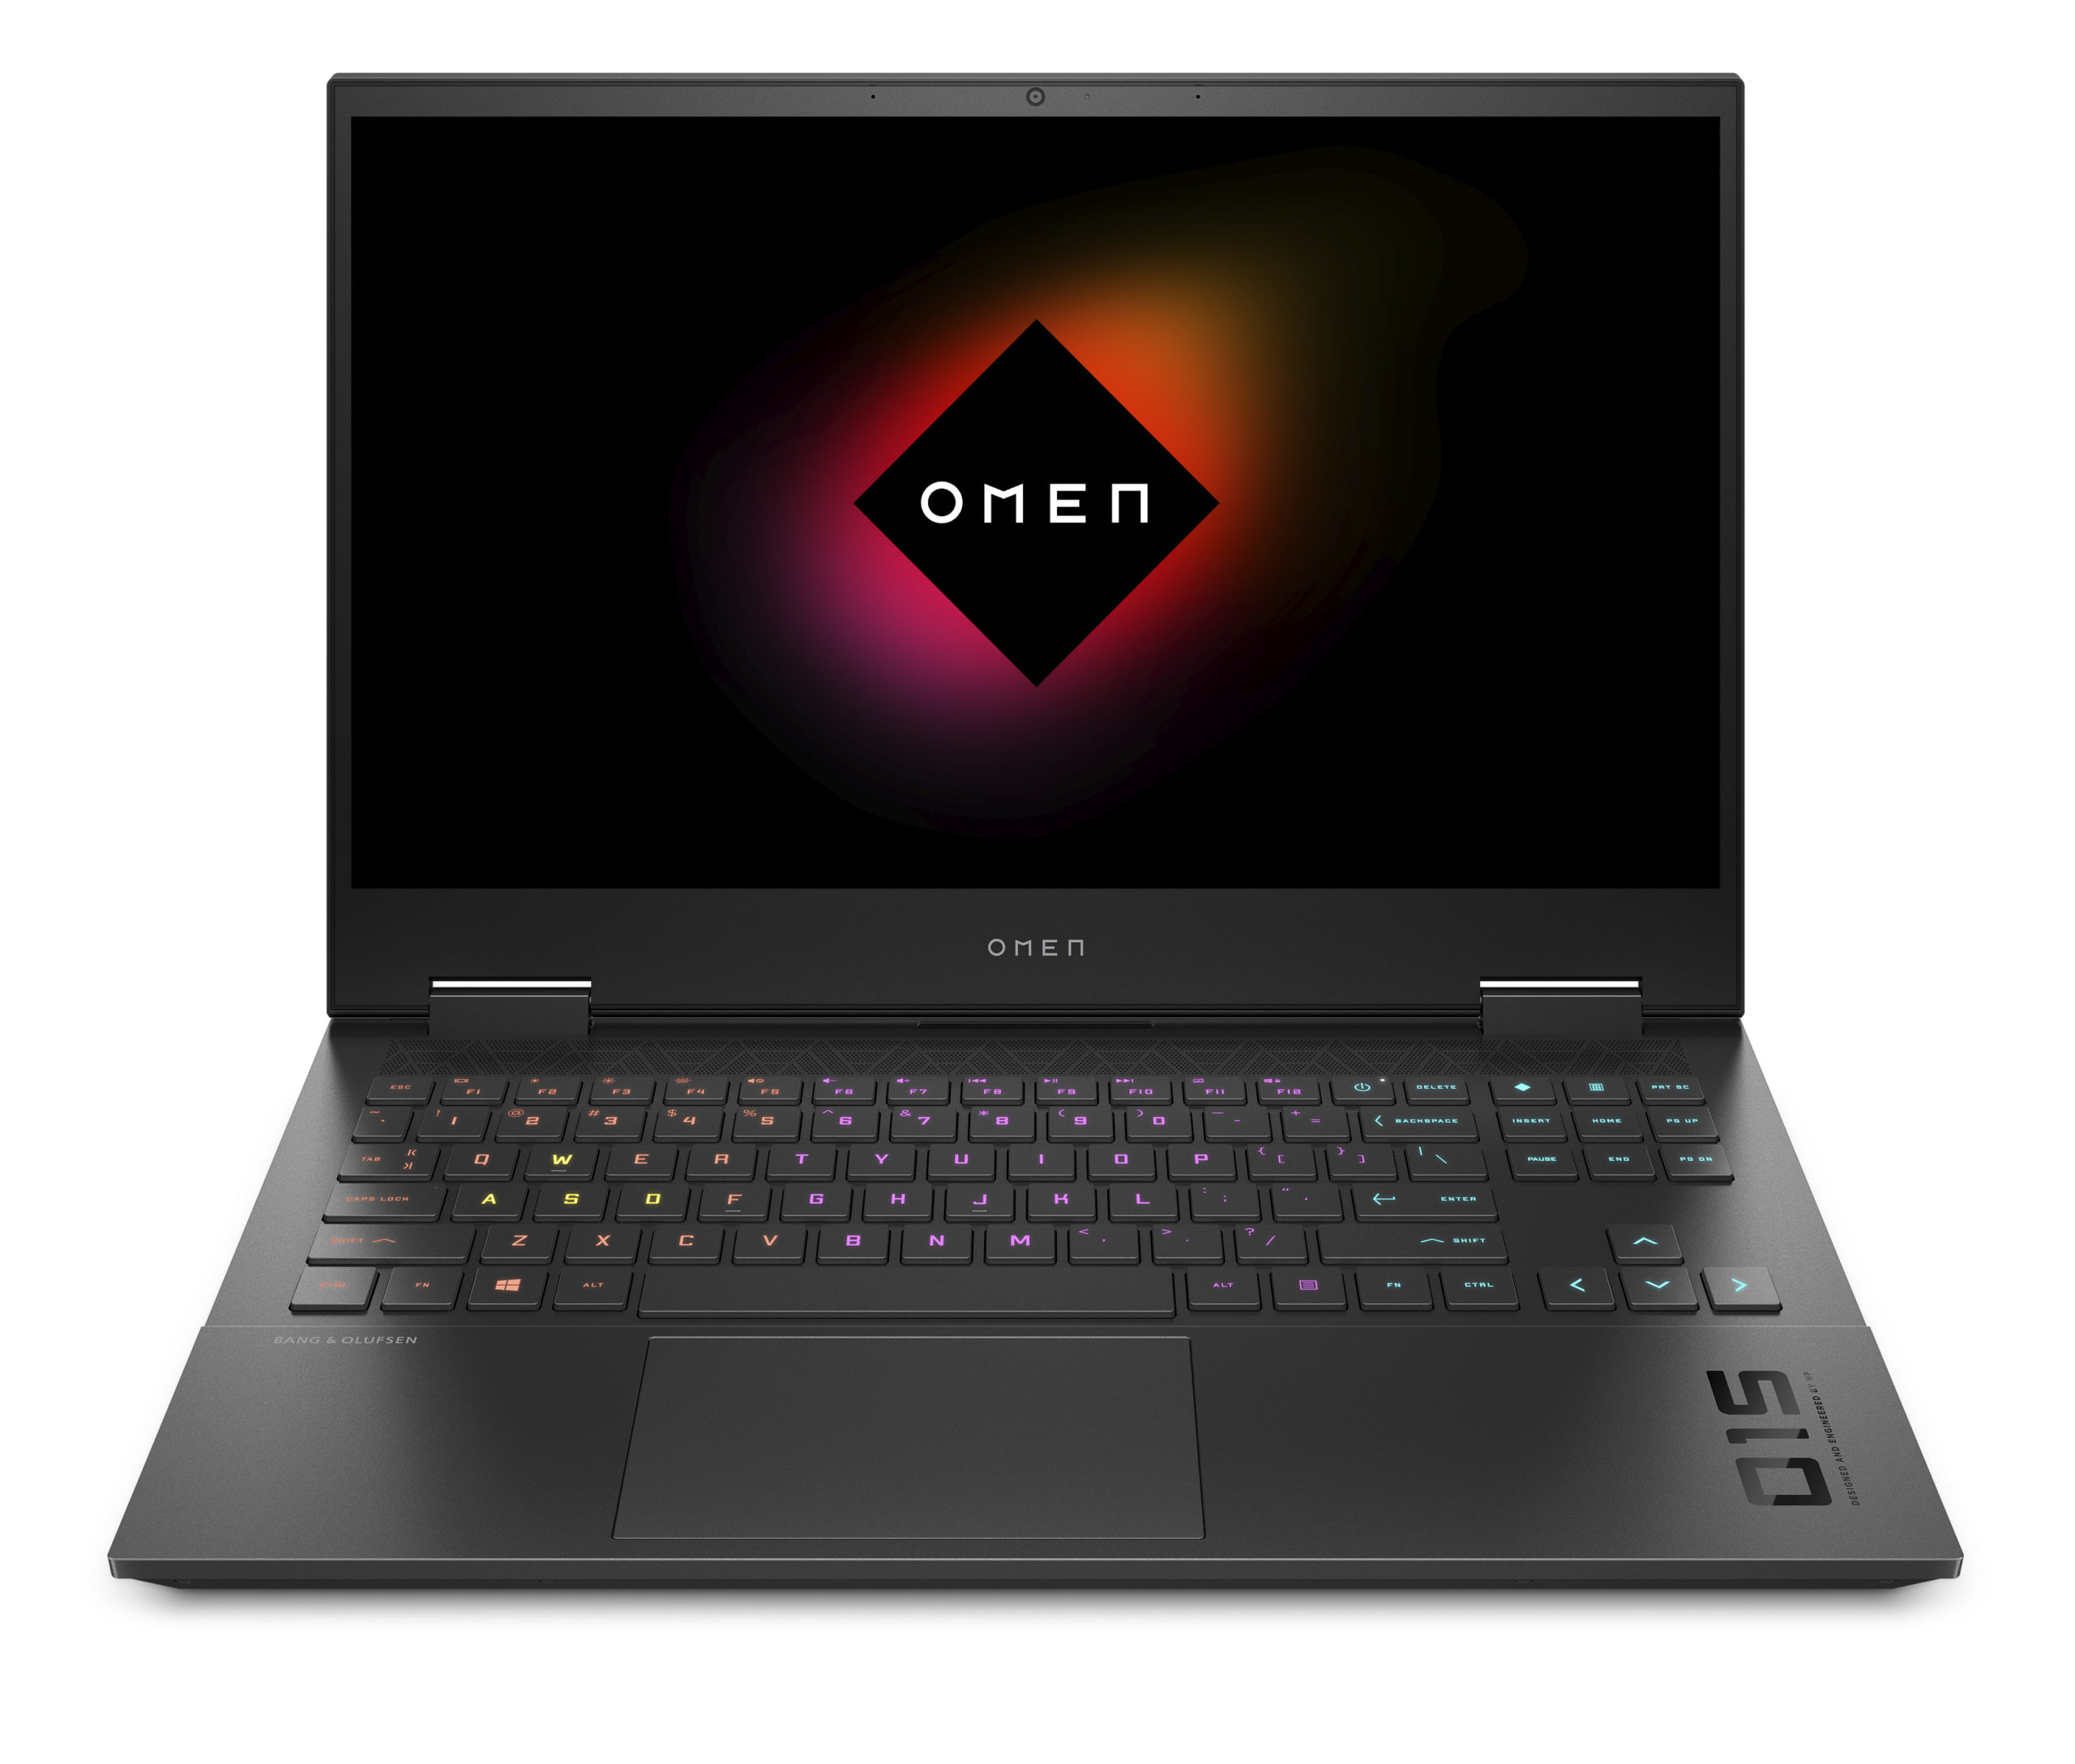 HP OMEN 15 open and facing reader